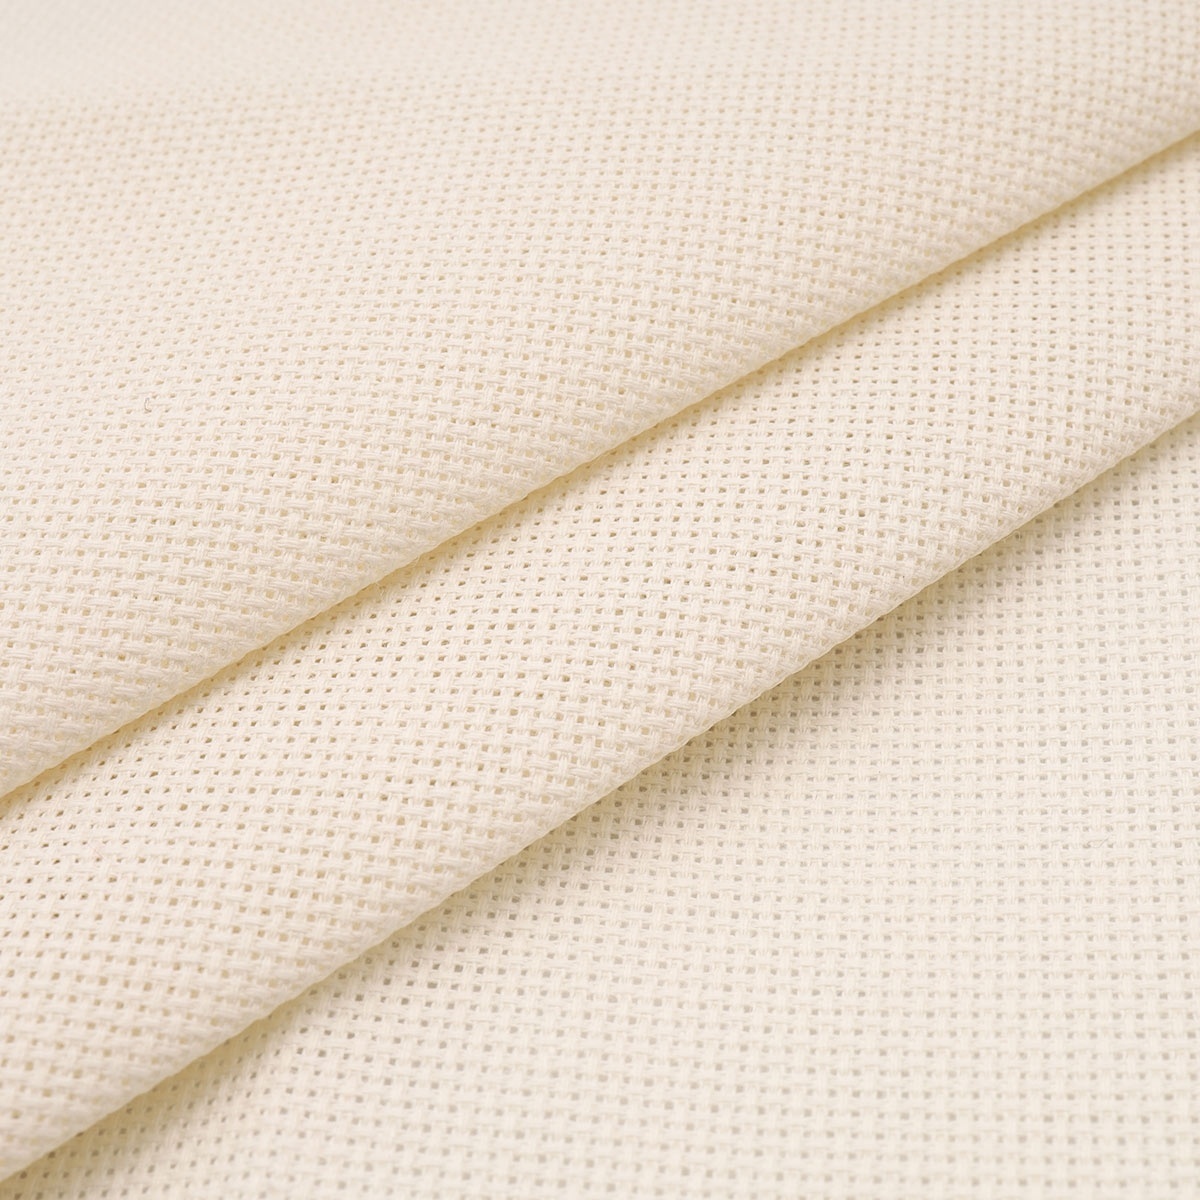 20 Count Aida Fabric by Zweigart 3326/264, Ivory фото 1